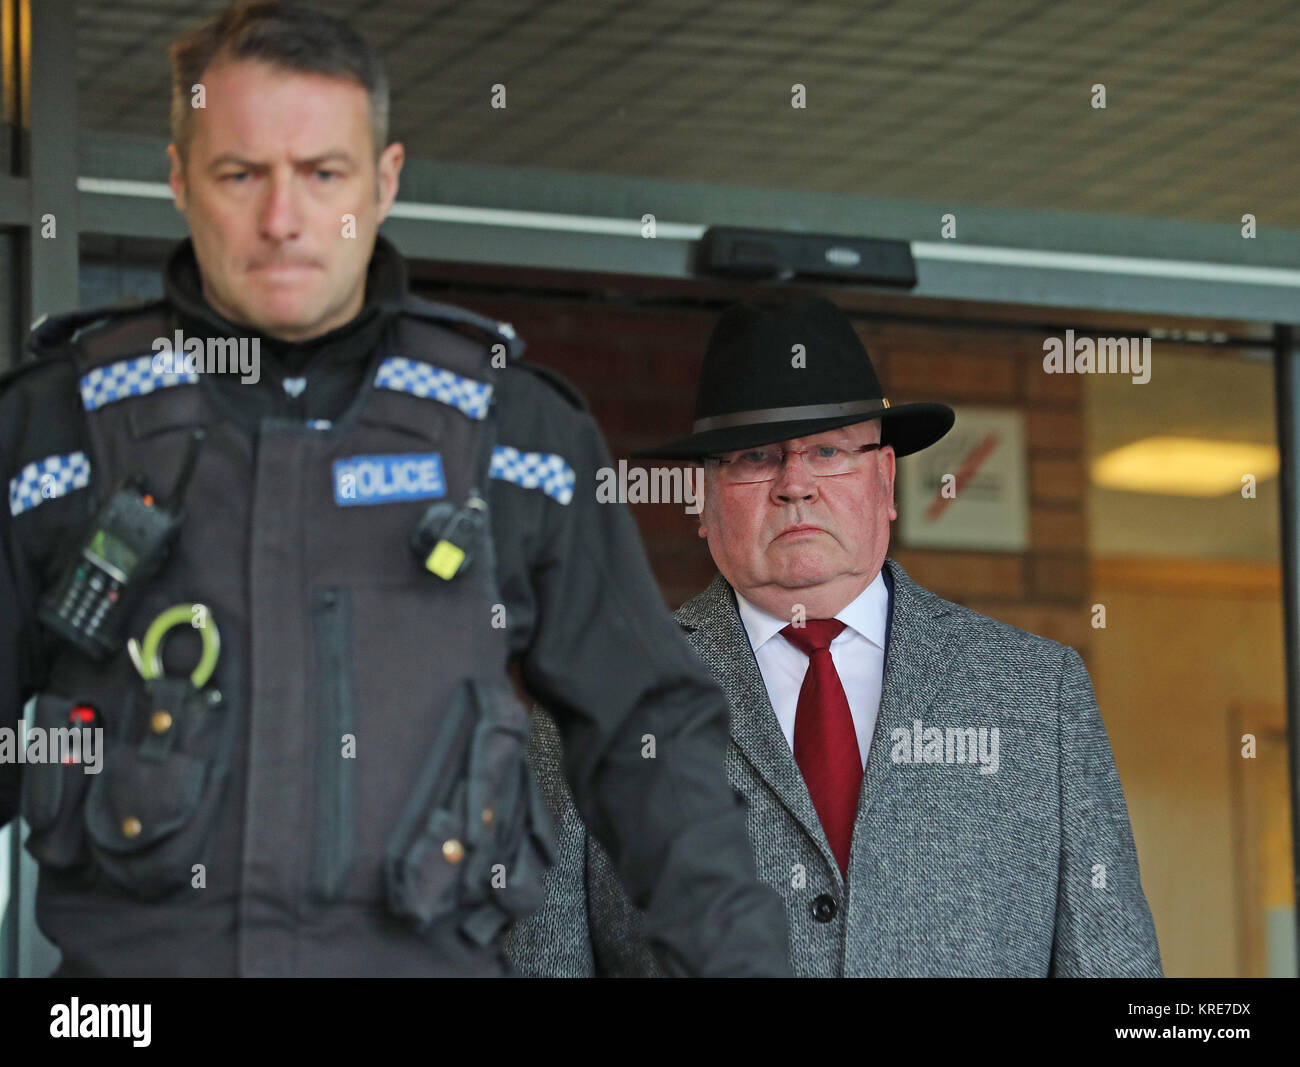 Alan Bramley, 69, one of seven former prison officers who worked at Medomsley Detention Centre in Consett, County Durham, after his appearance at leaves Newton Aycliffe Magistrates' Court in County Durham, charged with abusing teenage inmates in the 1970s and 1980s. Stock Photo